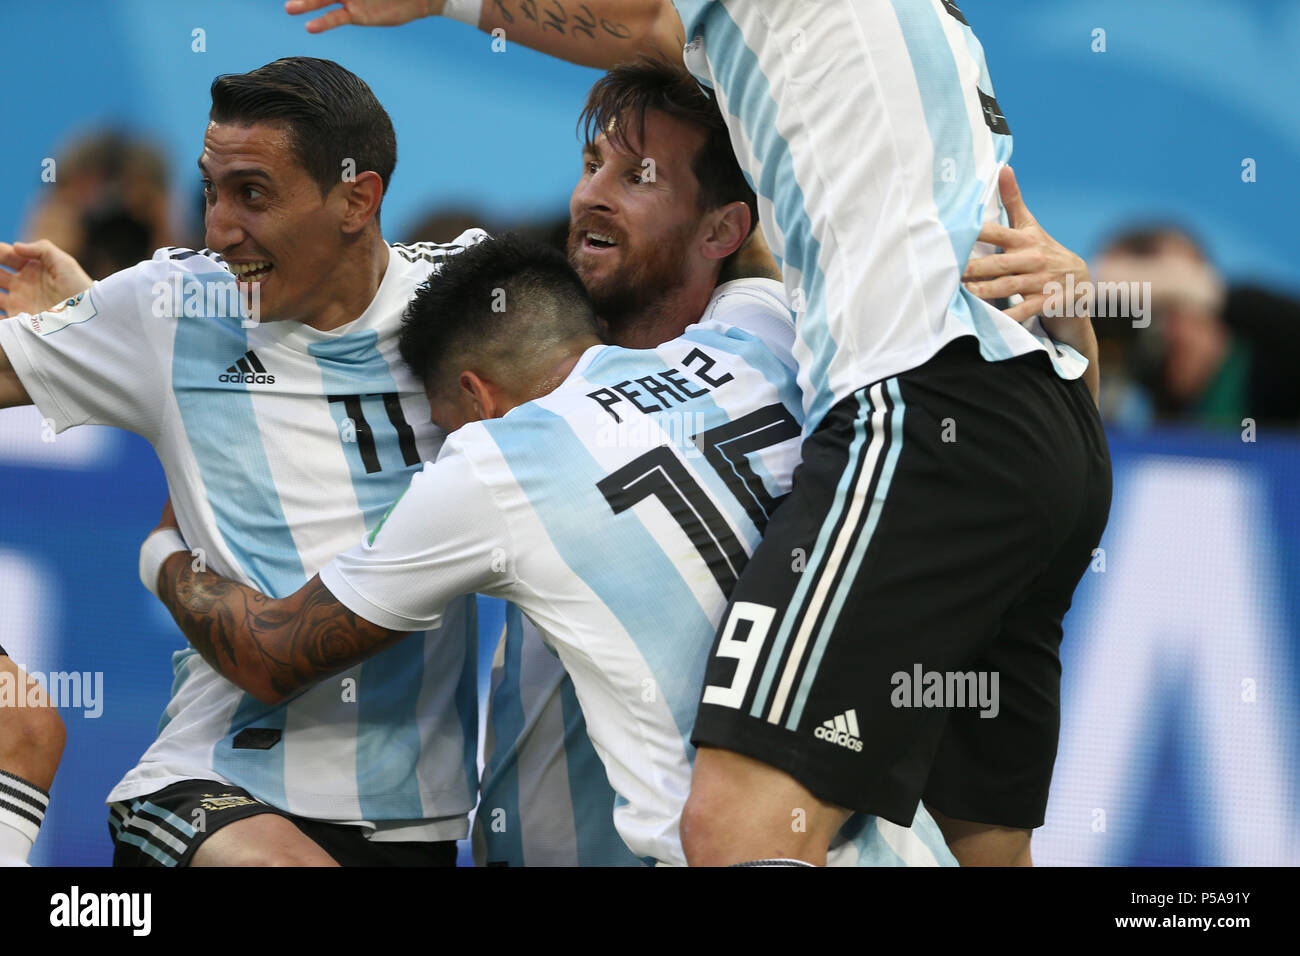 St Petersburg, Russia,  June 27, 2018. Match # 39 between Nigeria & Argentina:  After the 1st Goal by Lionel MESSI - Team mates celebrates. Argentina Won by 2:1 during Group D Match in St Petersburg Stadium in Russia  on 27th June   Seshadri SUKUMAR Credit: Seshadri SUKUMAR/Alamy Live News Stock Photo